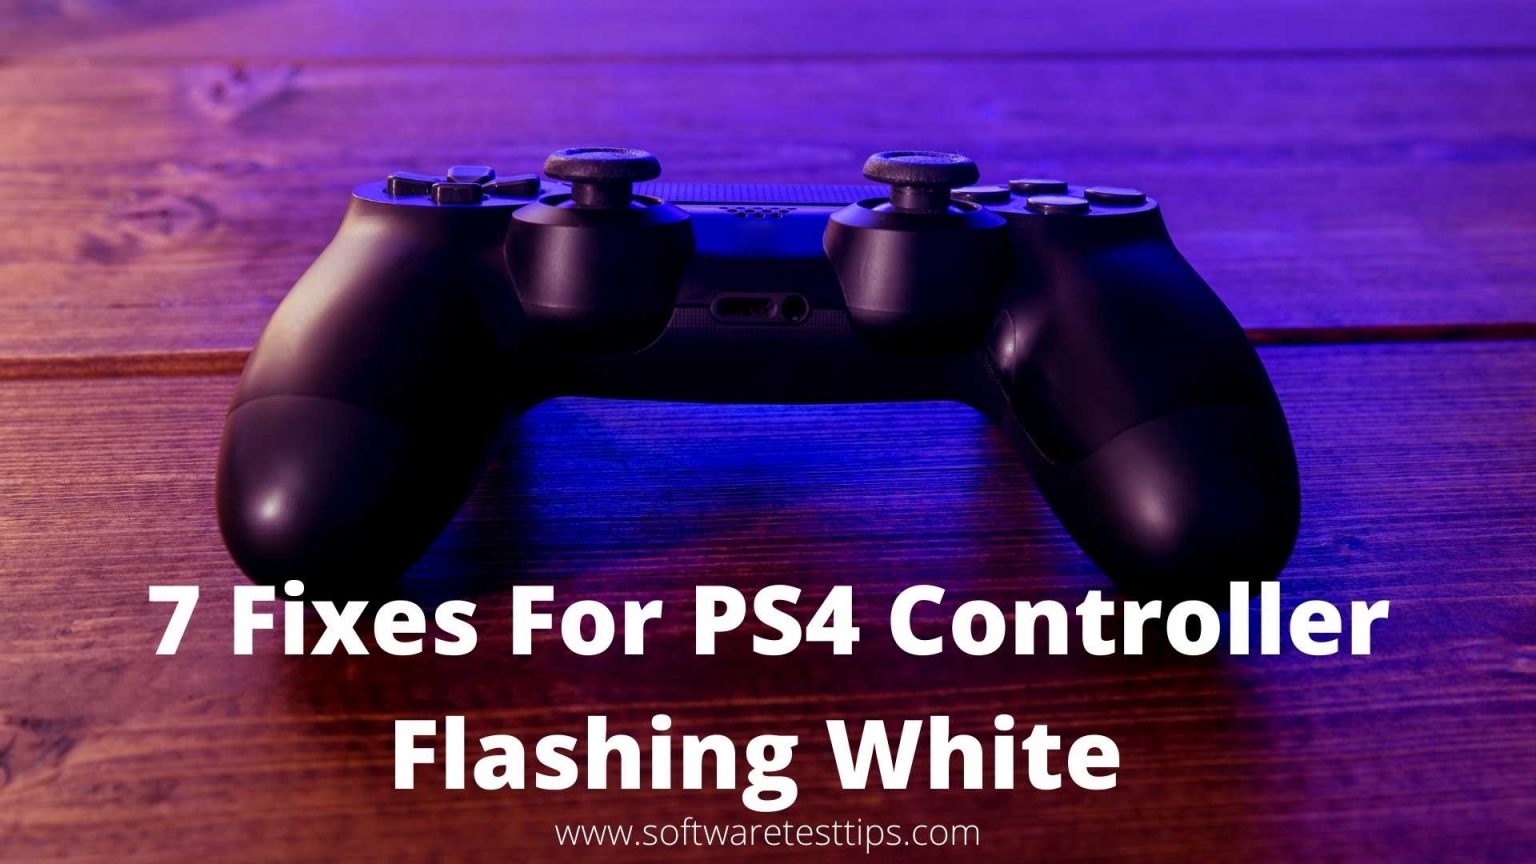 7 Fixes For PS4 Controller Flashing White